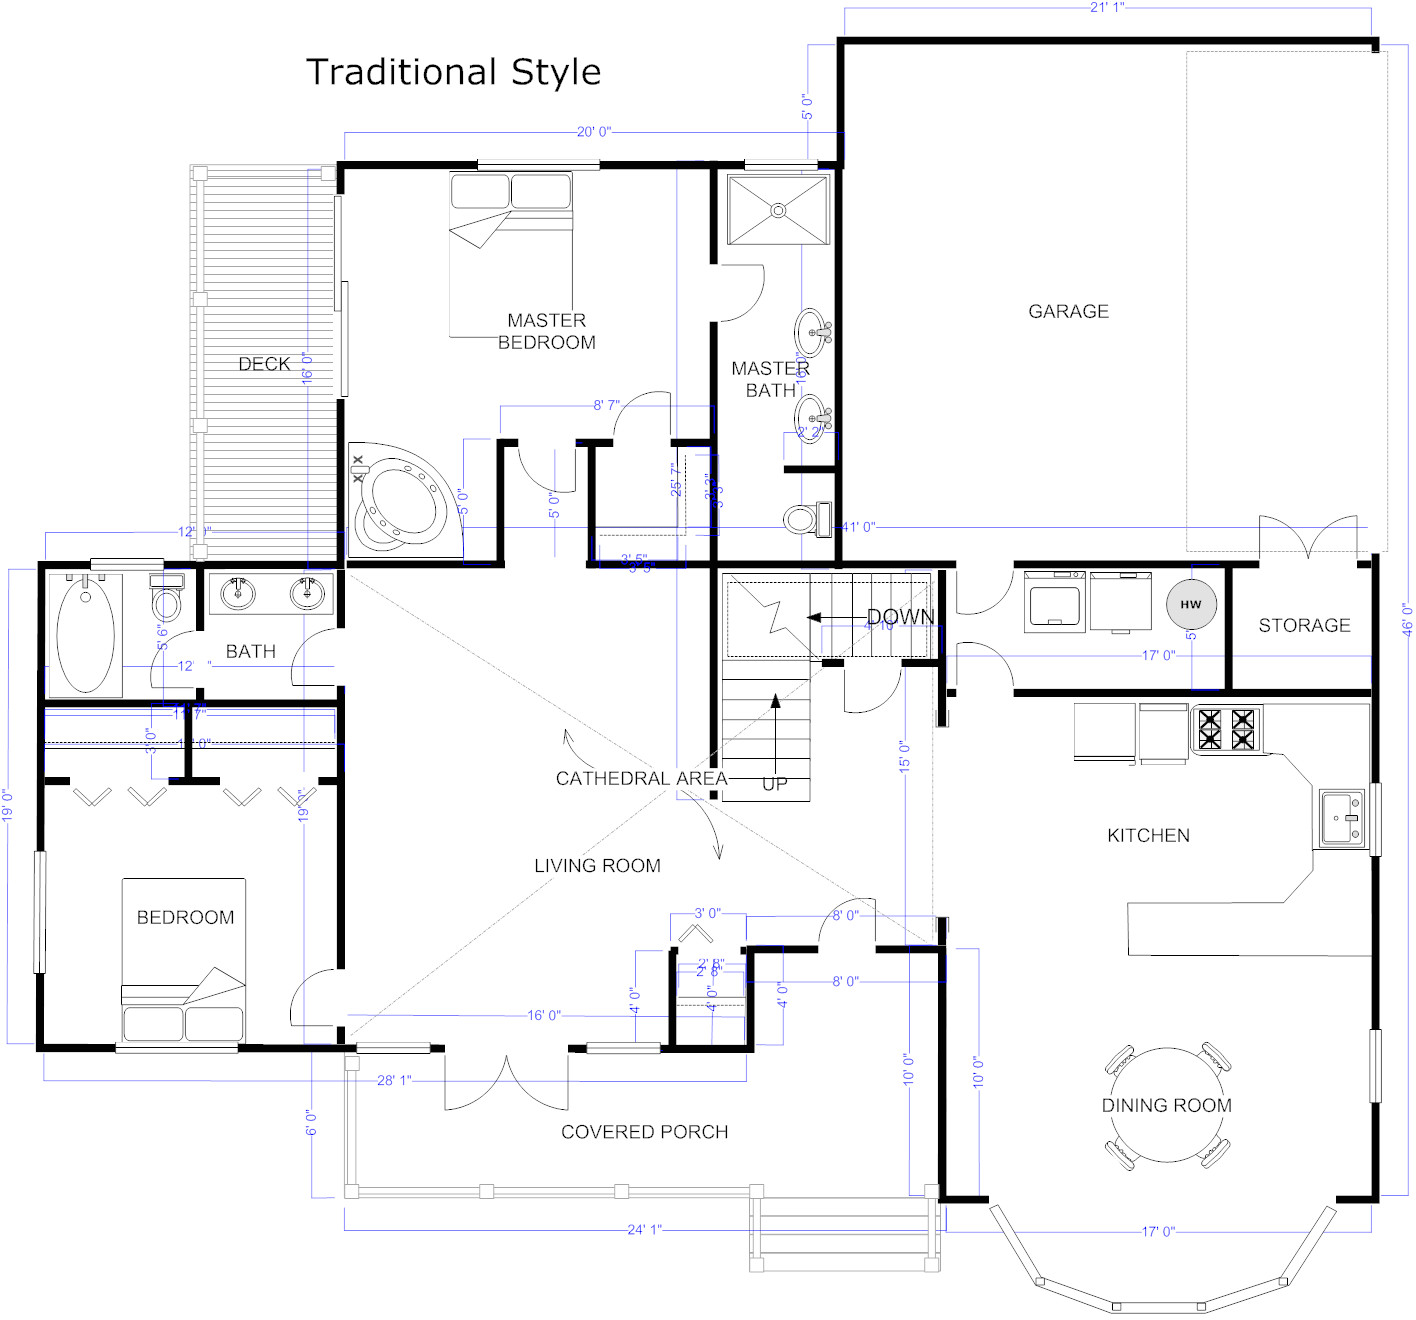 House Plan Drawer Architecture software Free Download Online App